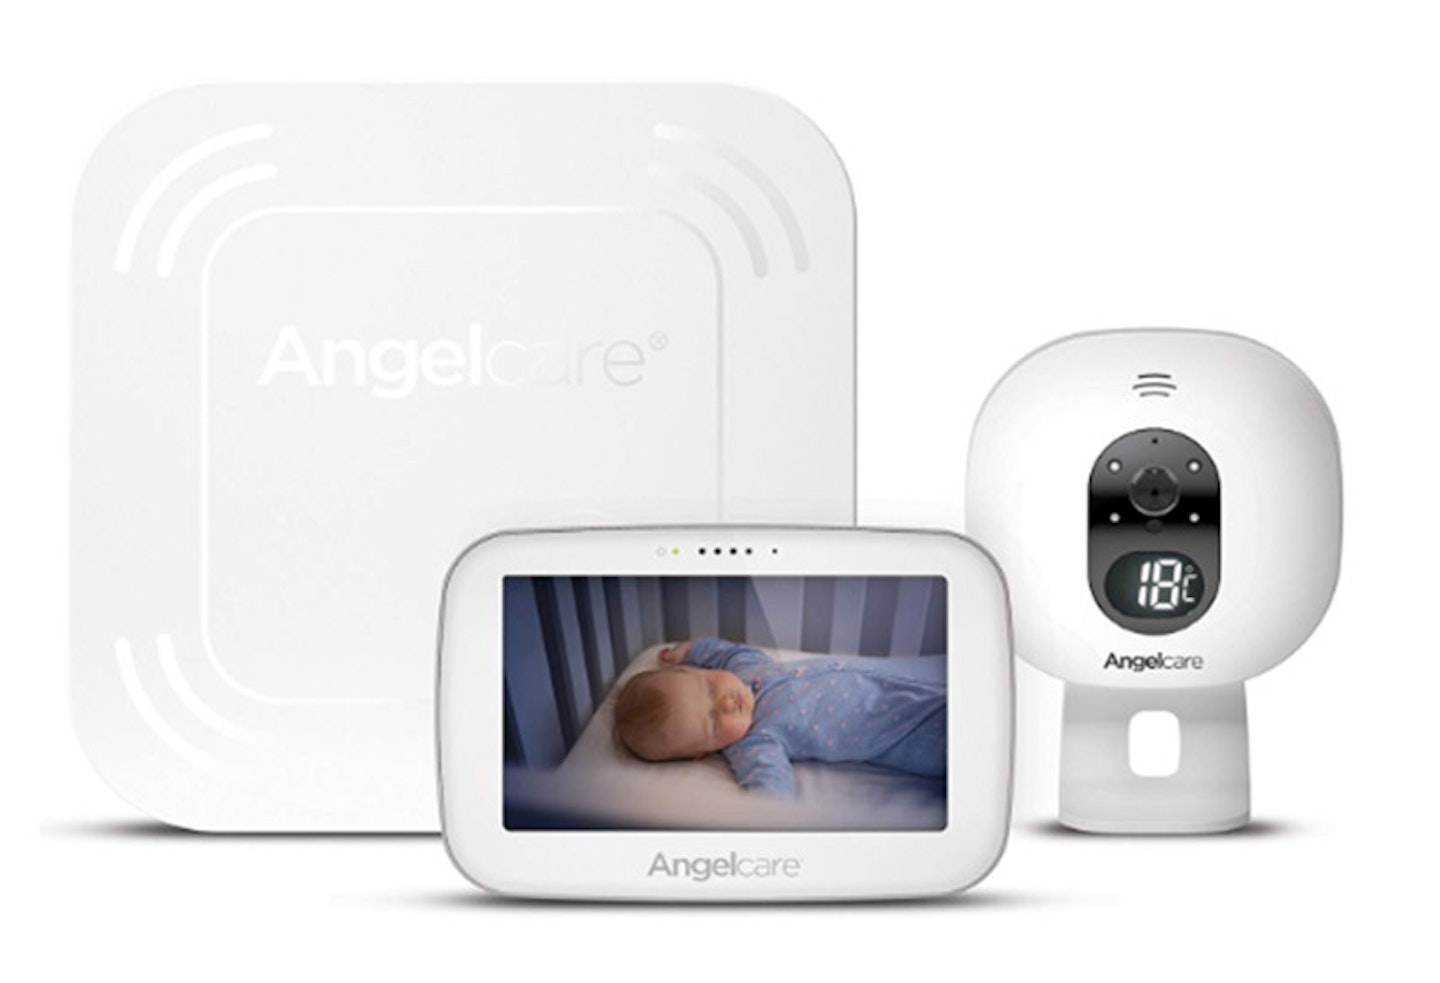 6 Fun Ideas For Your Baby's First Christmas - Snuza Baby Breathing Monitors  - Snuza Baby Breathing Monitors